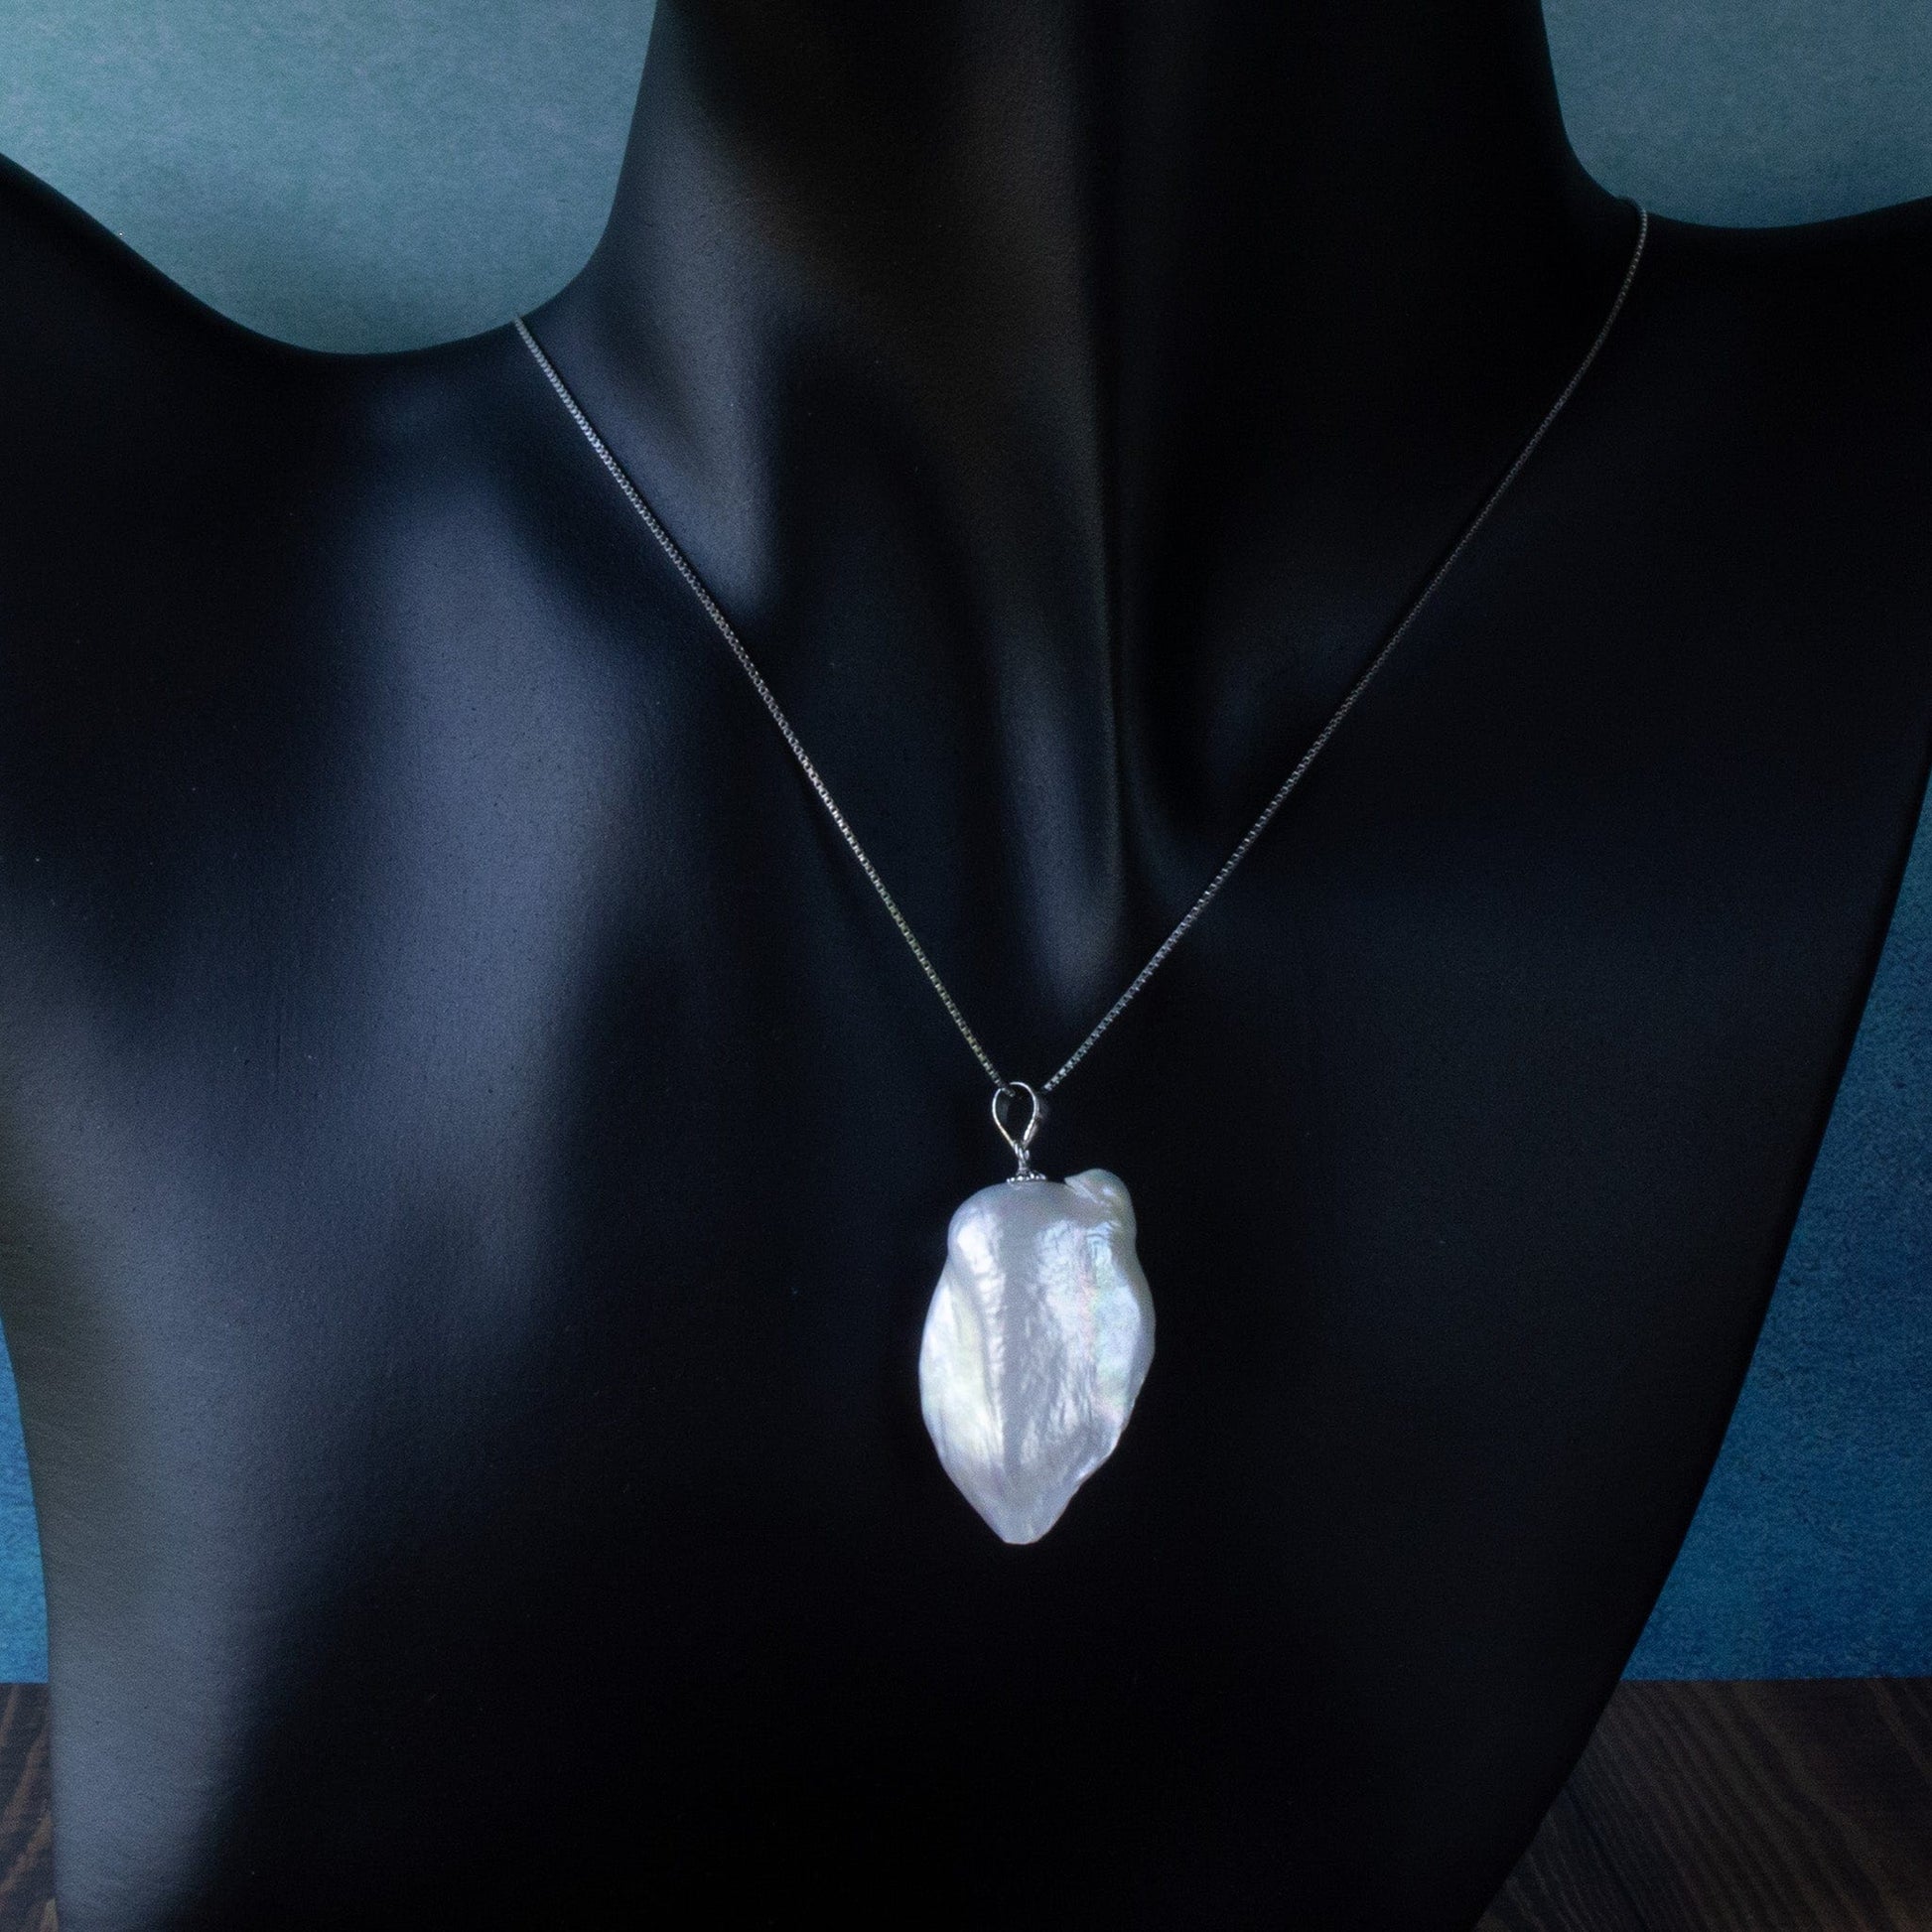 Cheekoo's Handcrafted Large Freshwater White Baroque Pearl Sterling Silver Necklace, 30mm x 18 mm Pearl